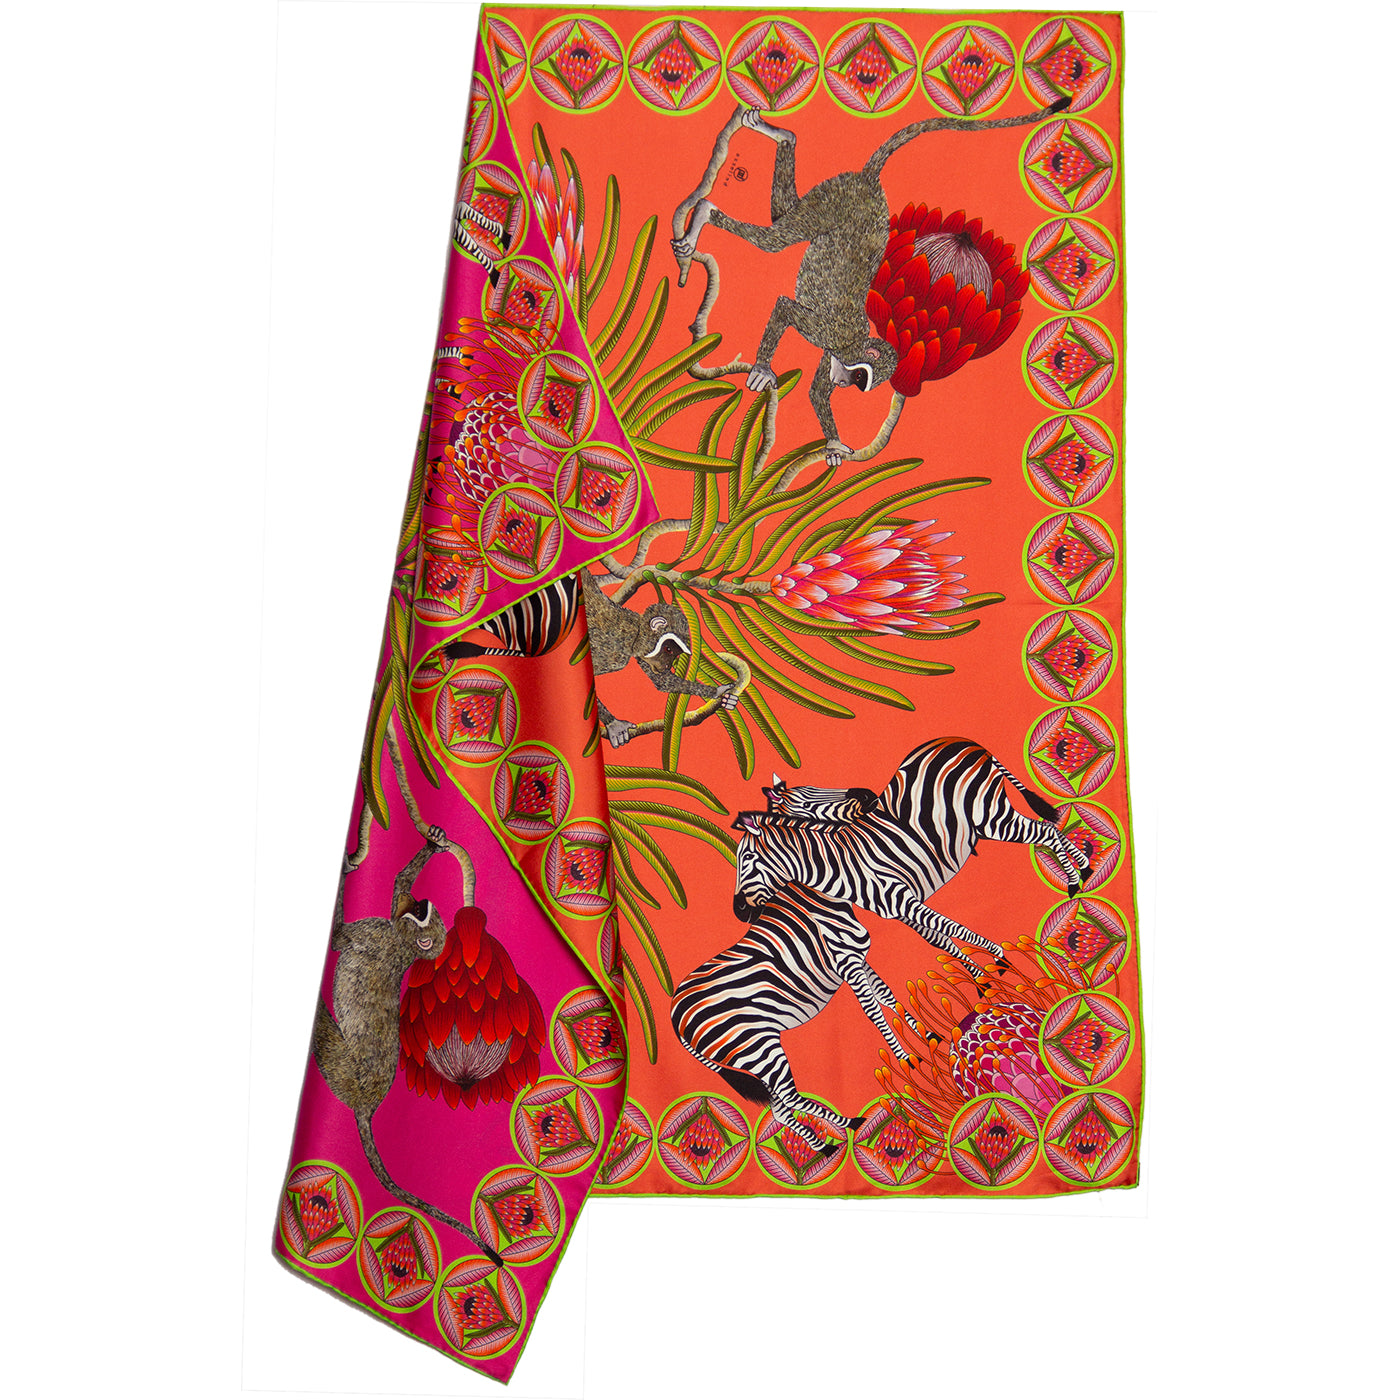 Pink and orange silk scarf with Zebras Monkies and Protea flowers